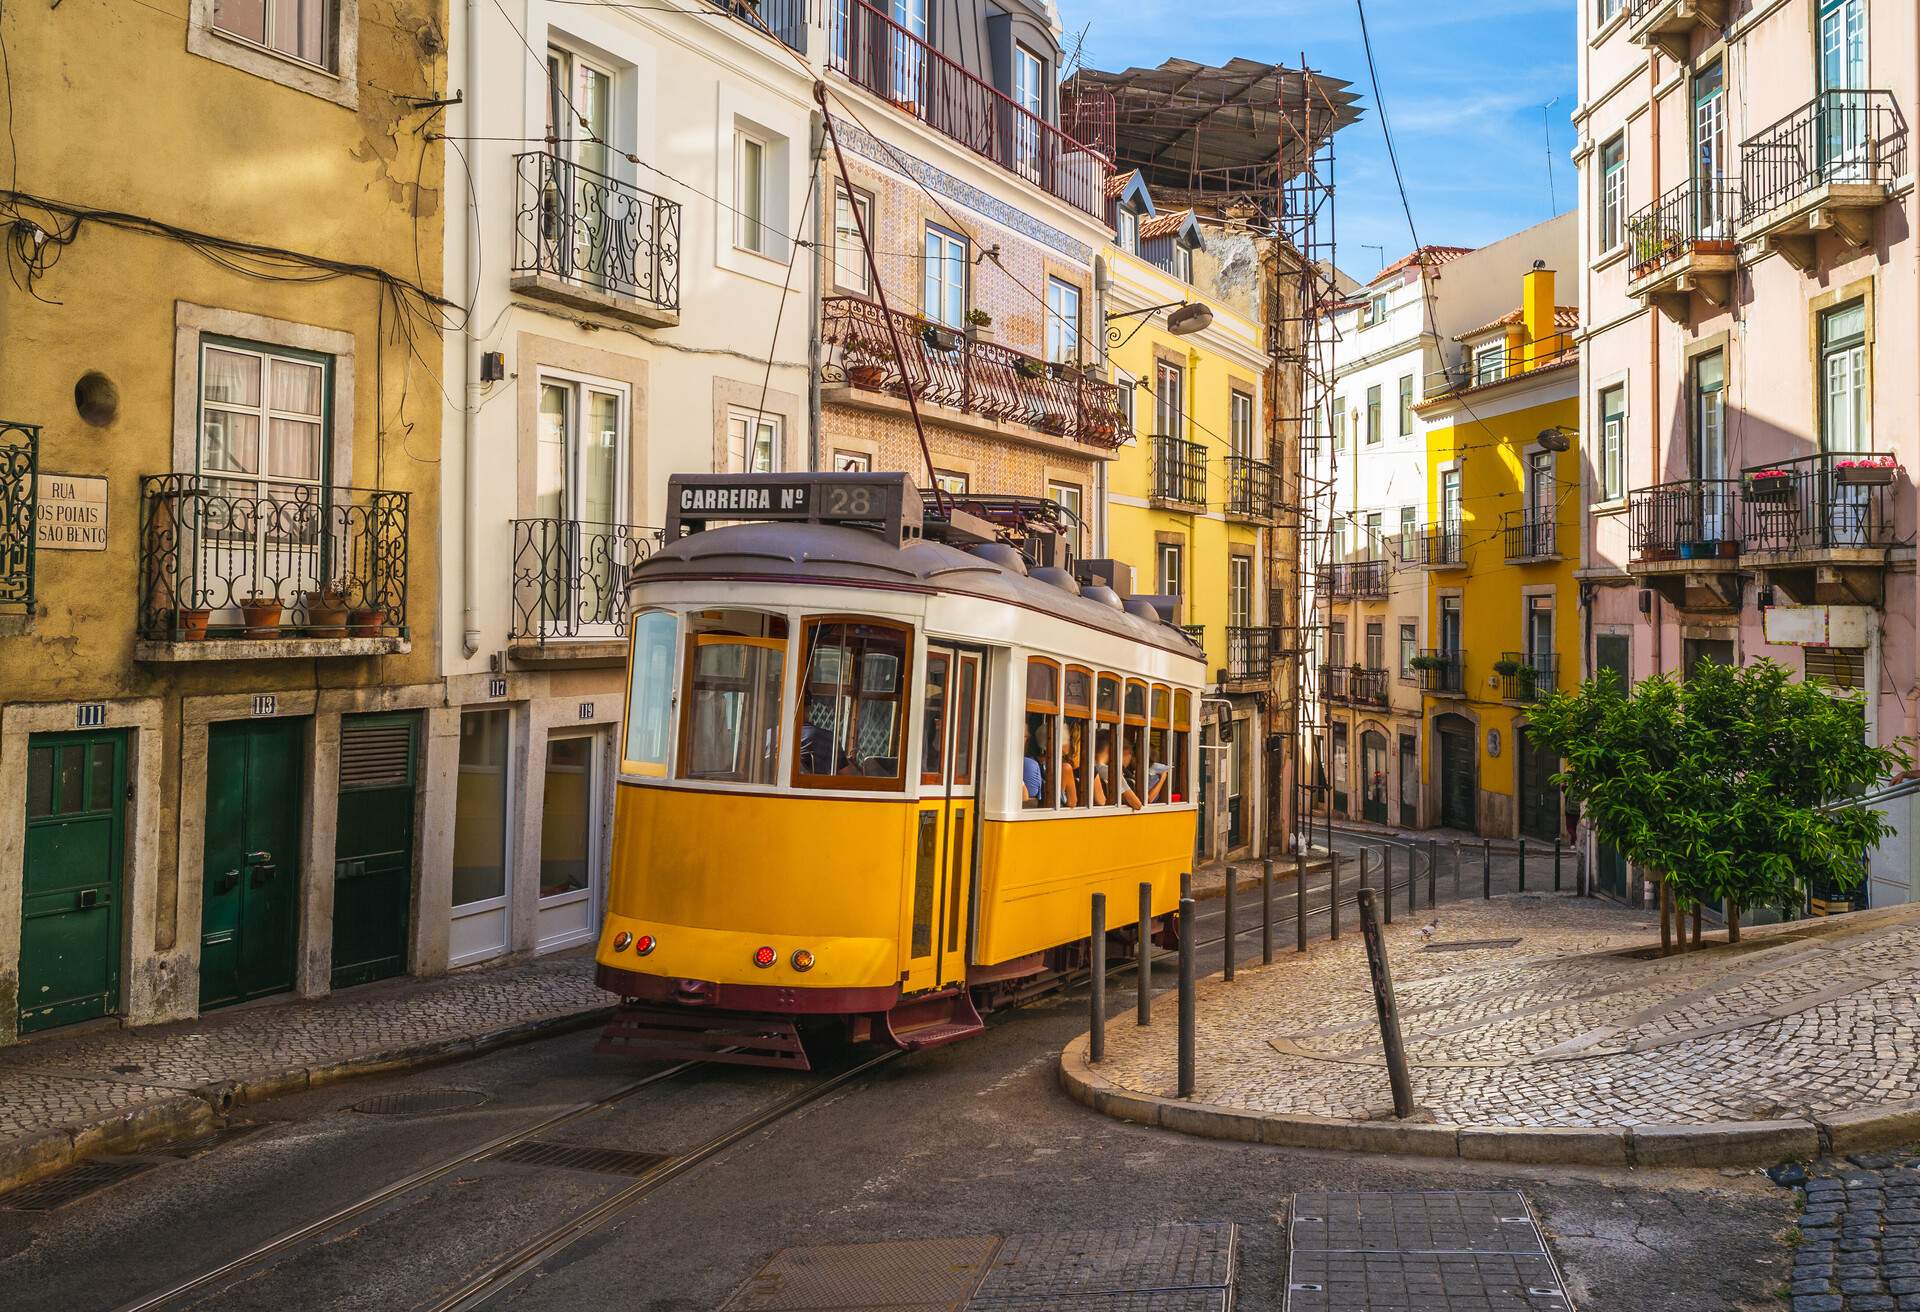 A yellow tram travelling on a narrow railway road flanked by colourful buildings.